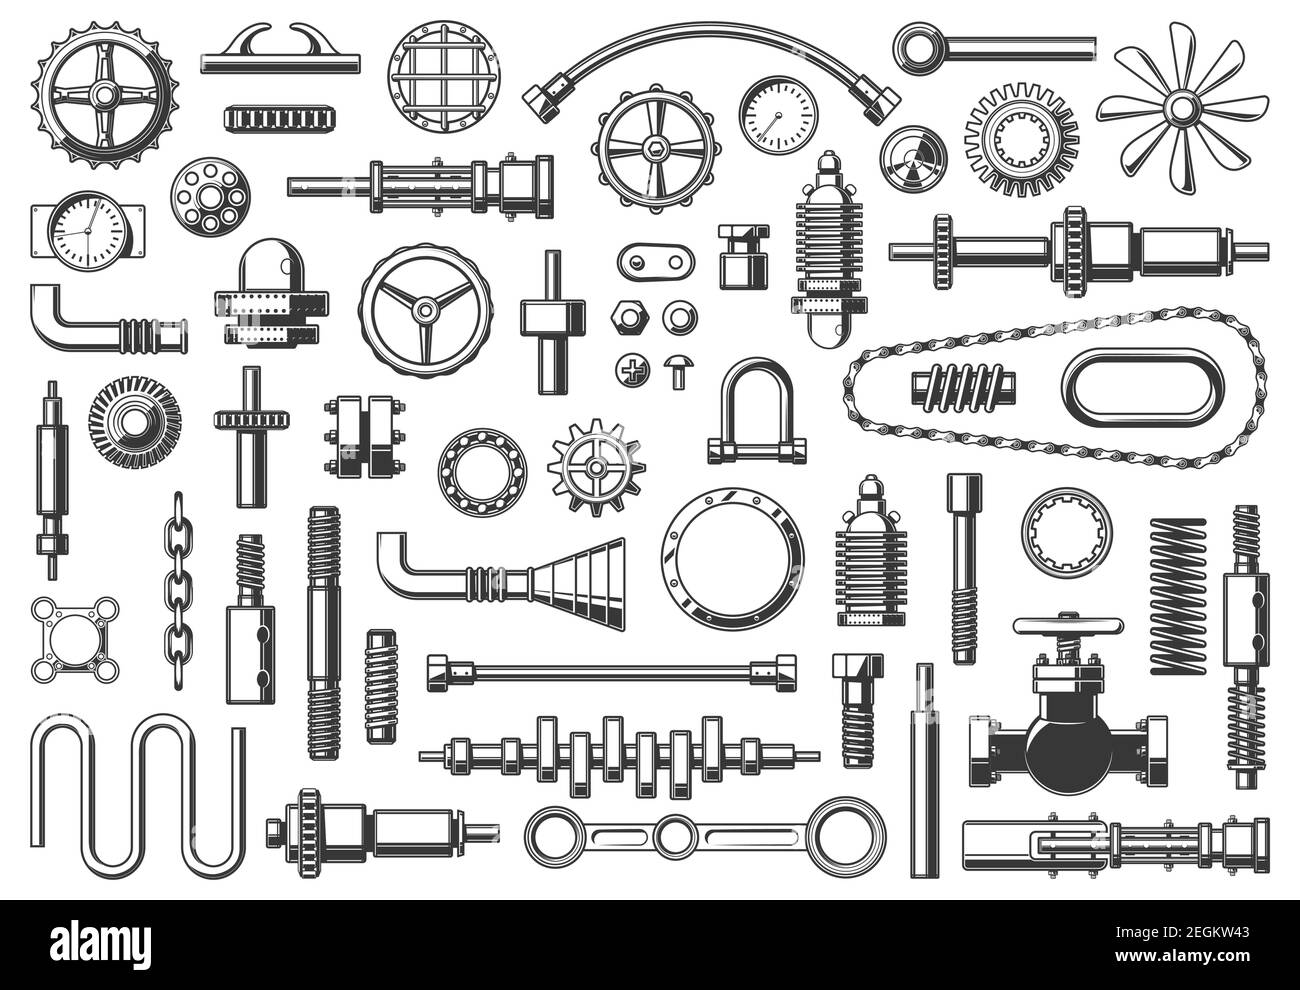 Machine parts vector icons chain, pipe and coupling, gear or pinion. Monochrome clamp, nut, crankshaft and timing belt with steering screw, hose and f Stock Vector